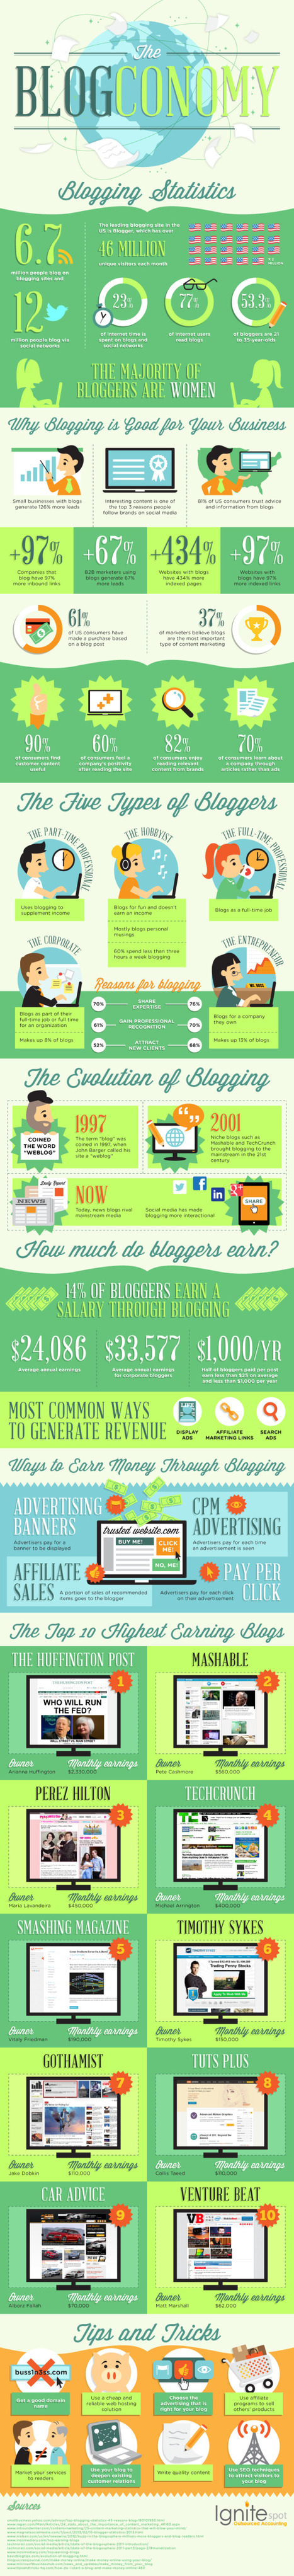 Infographic: The Blogconomy and Blogging Stats | Design, Science and Technology | Scoop.it